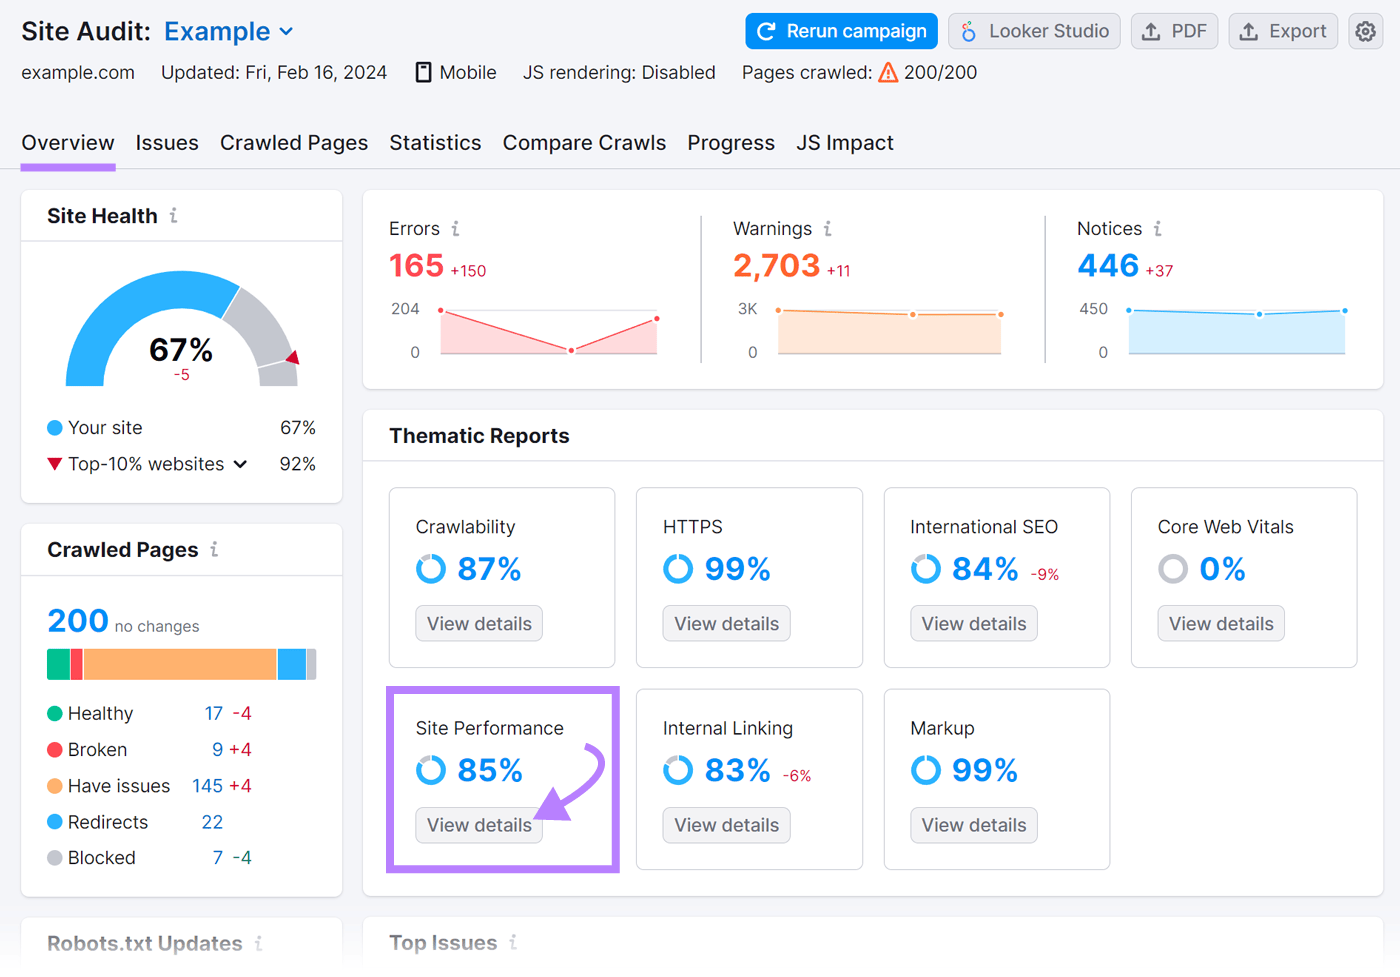 “Site Performance” widget highlighted under “Thematic Reports" section in Site Audit tool